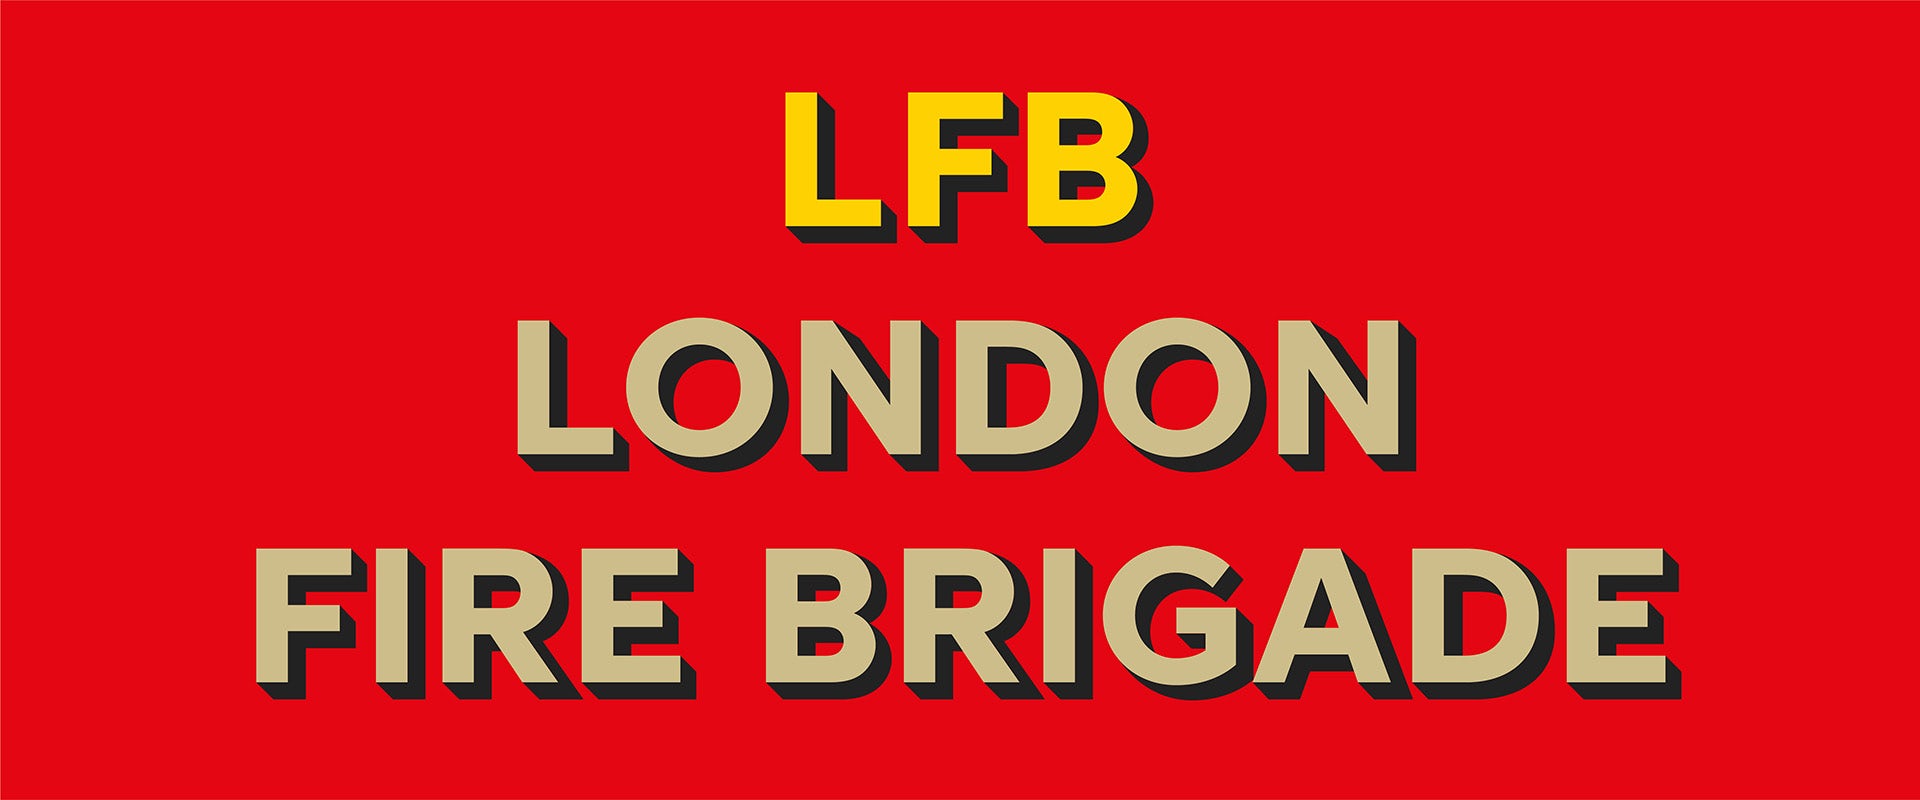 Image reads 'LFB London Fire Brigade' in yellow against a red background